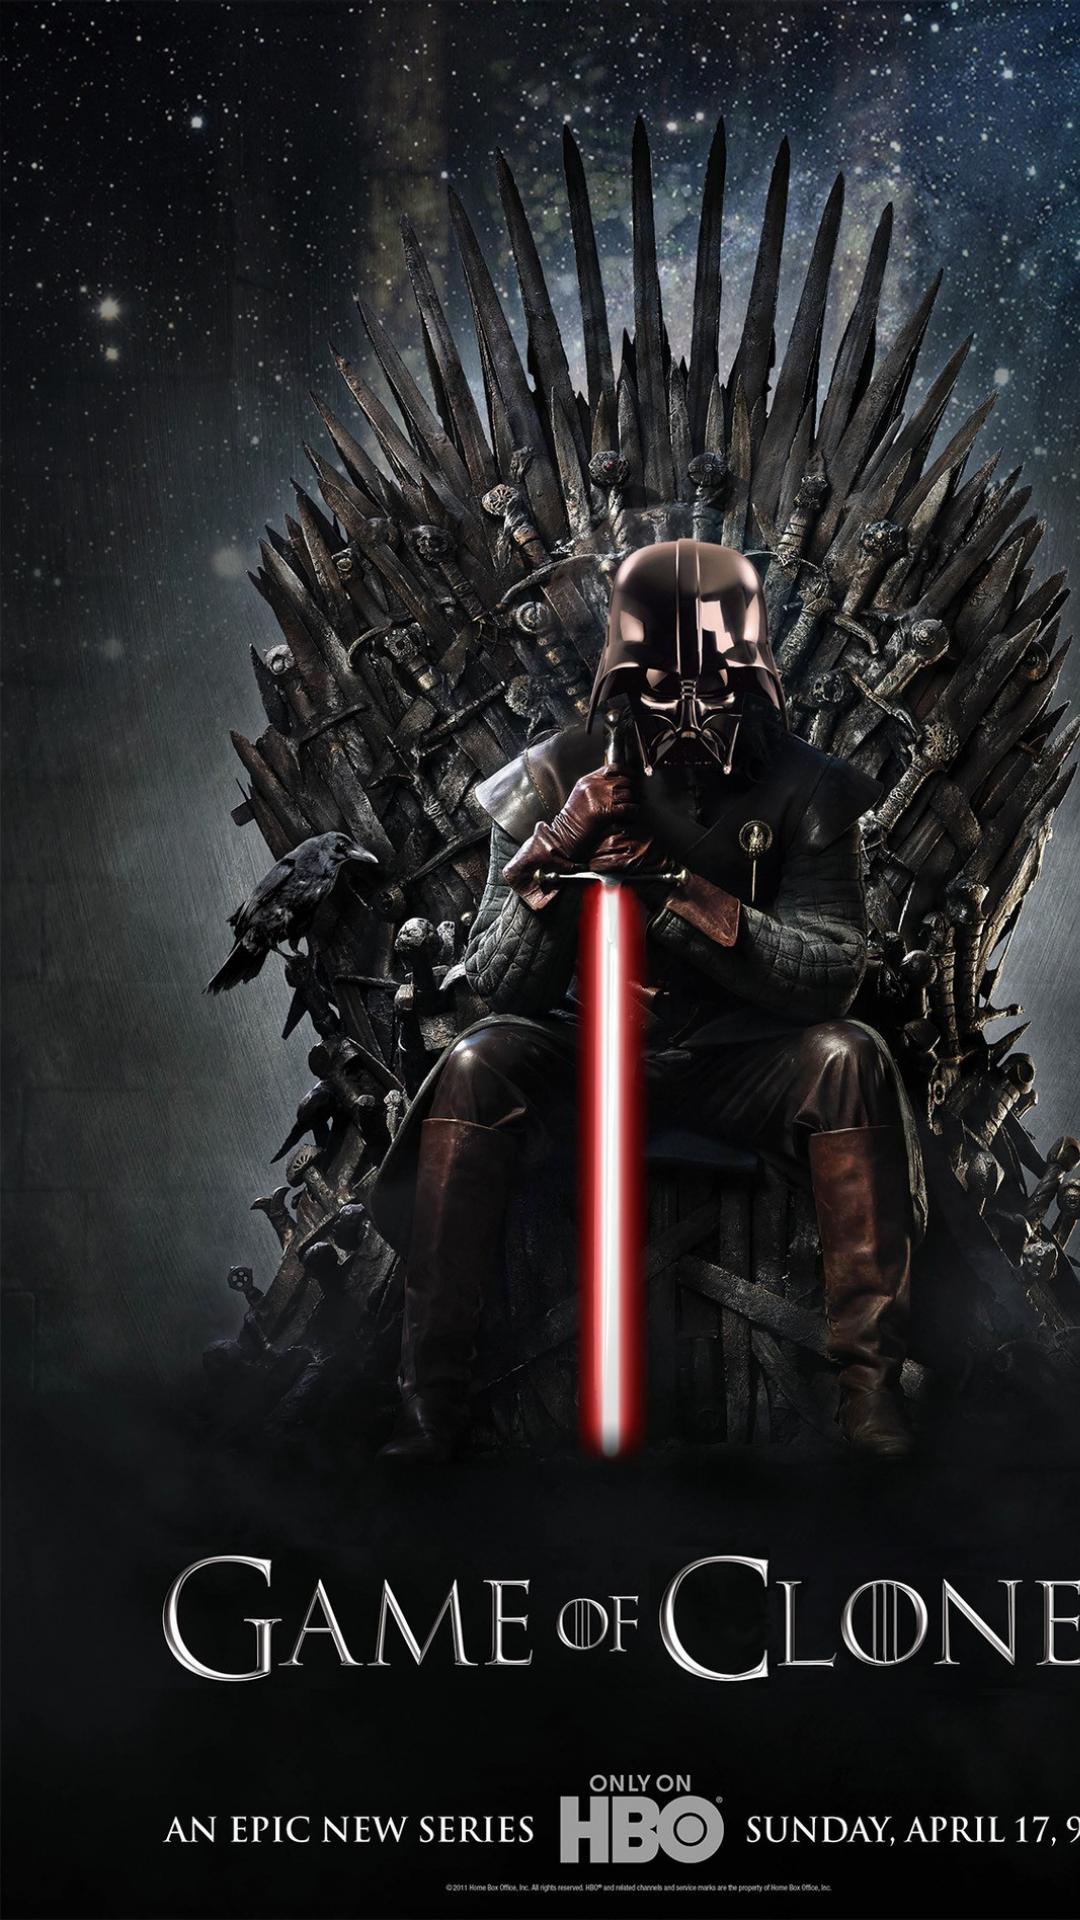 Lightsabers game of thrones iron throne clones wallpaper 69039 1080x1920